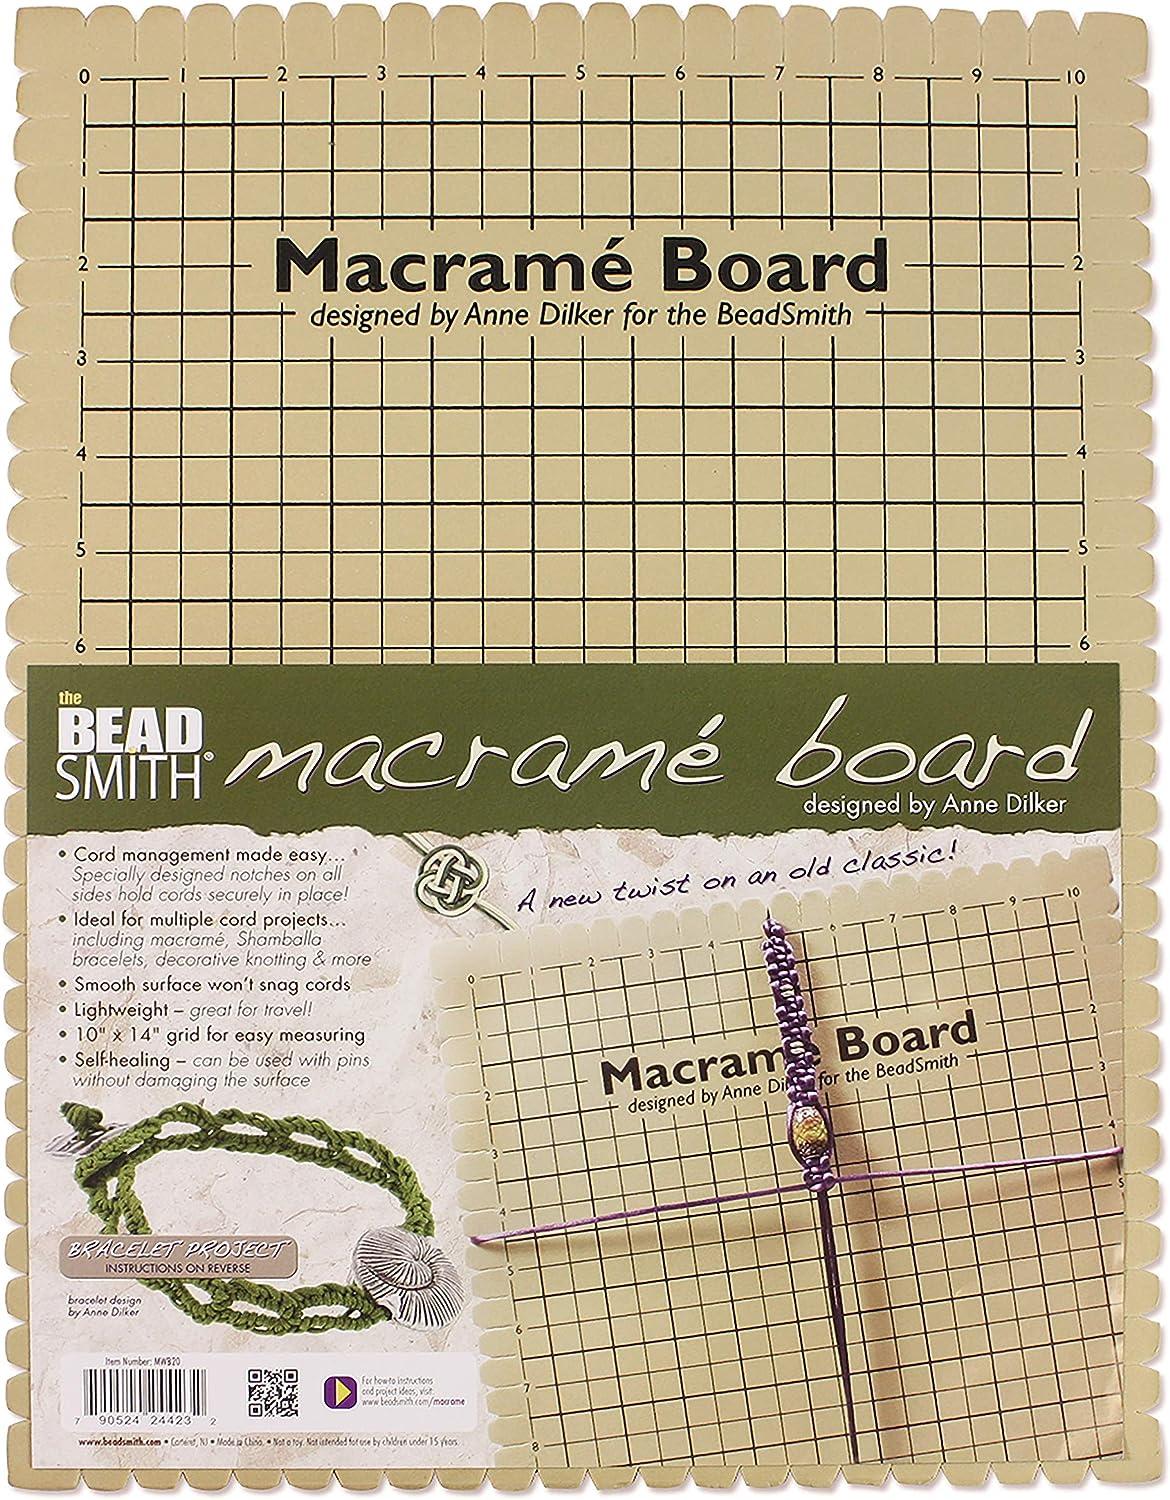 The Beadsmith Macrame Board 11.5 x 15.5 inches 0.5-inch-Thick Foam